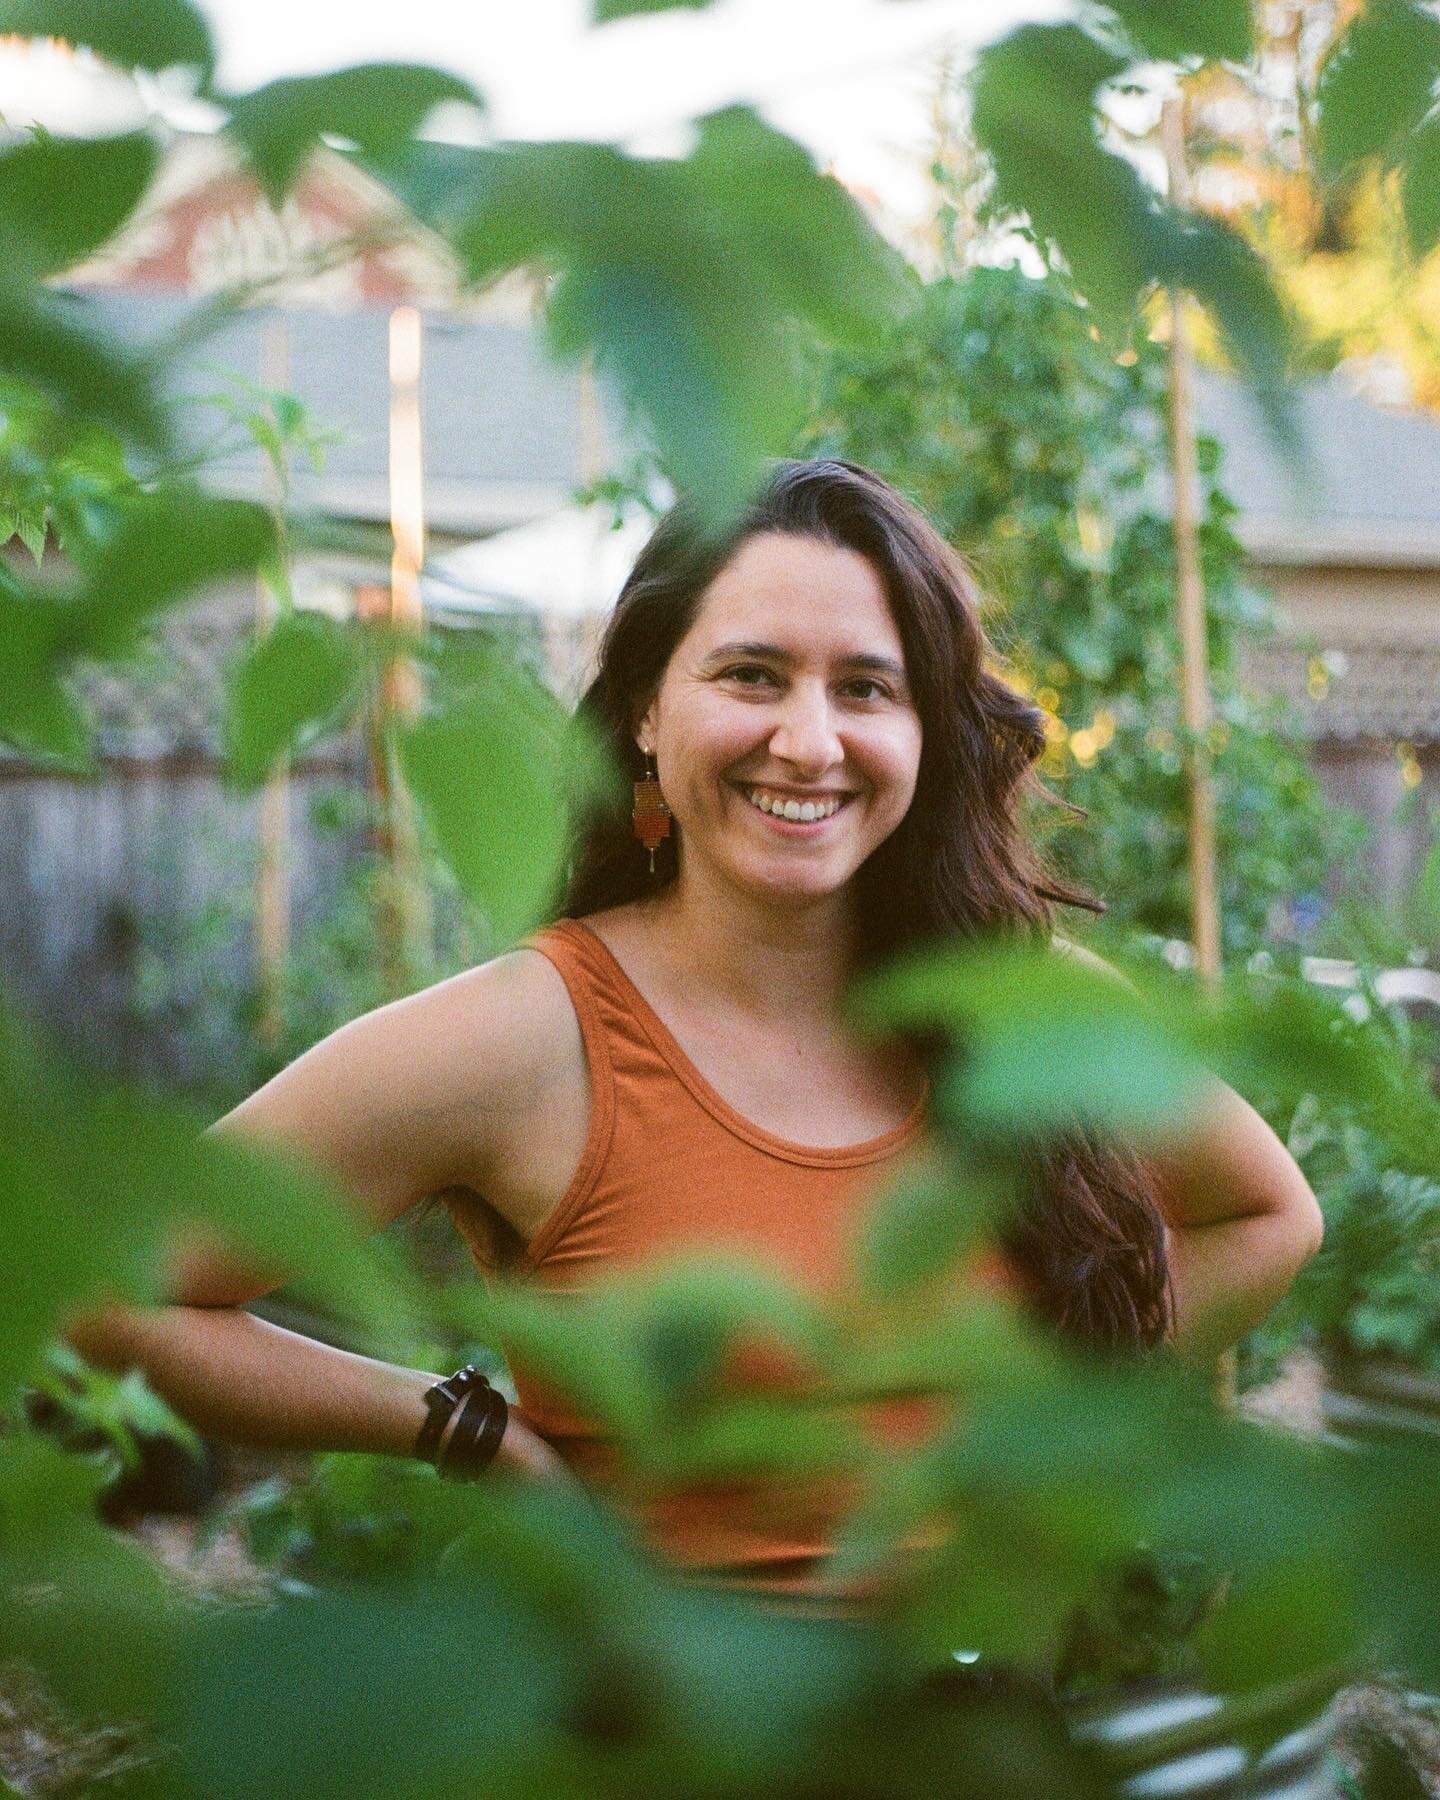 Summer on film 🌞 the joy and thrill of getting scans back and making prints months after the photos were taken is always so special. I adore taking portraits of people. Now if I can just figure out why 5 photos of every roll have been turning out bl